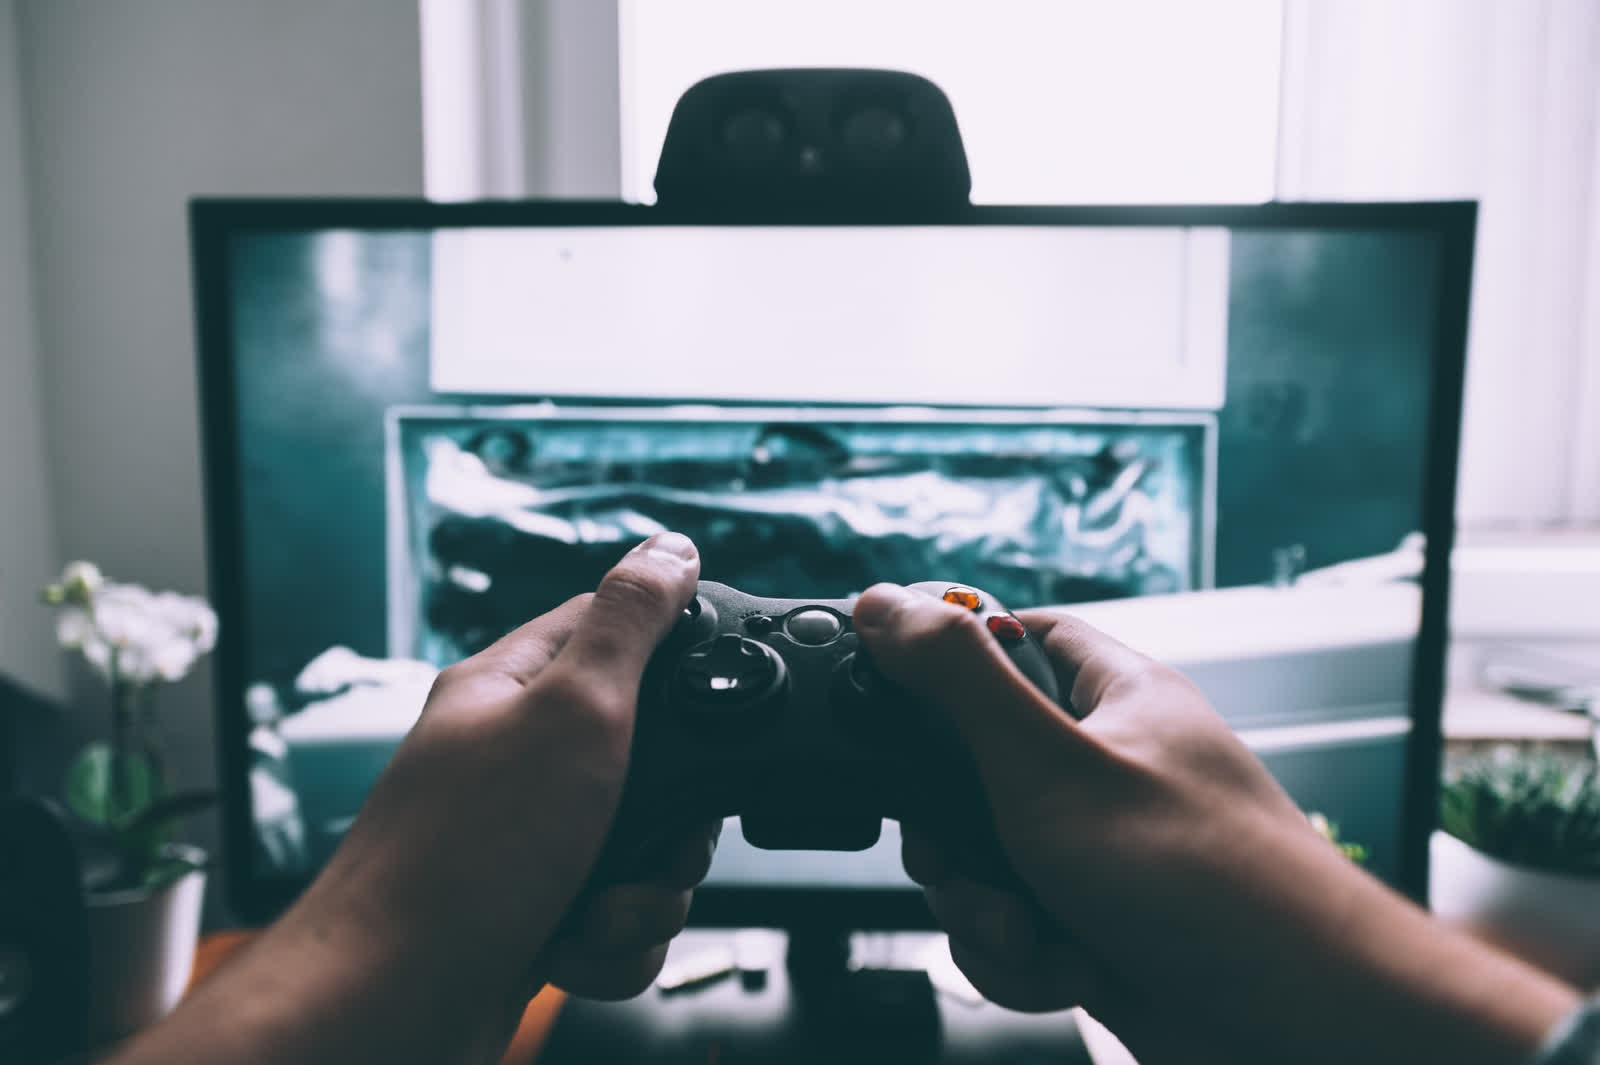 People are gaming even more now in the post-lockdown world